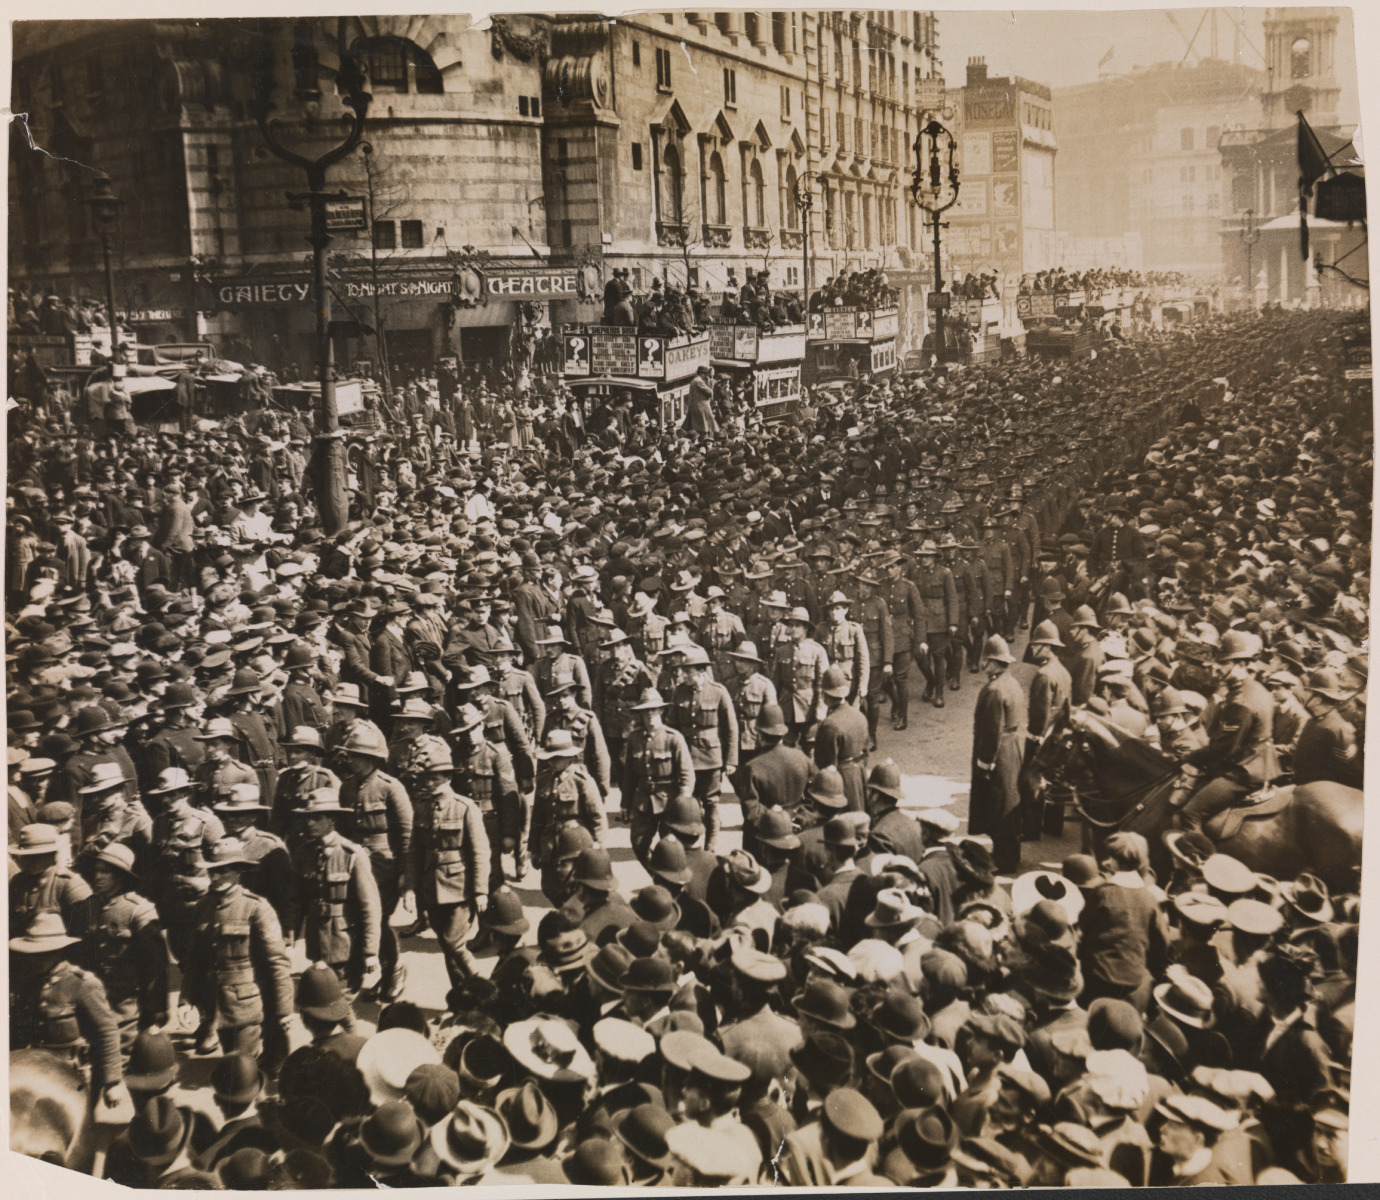 Images and voices of Anzac live on at the National Library